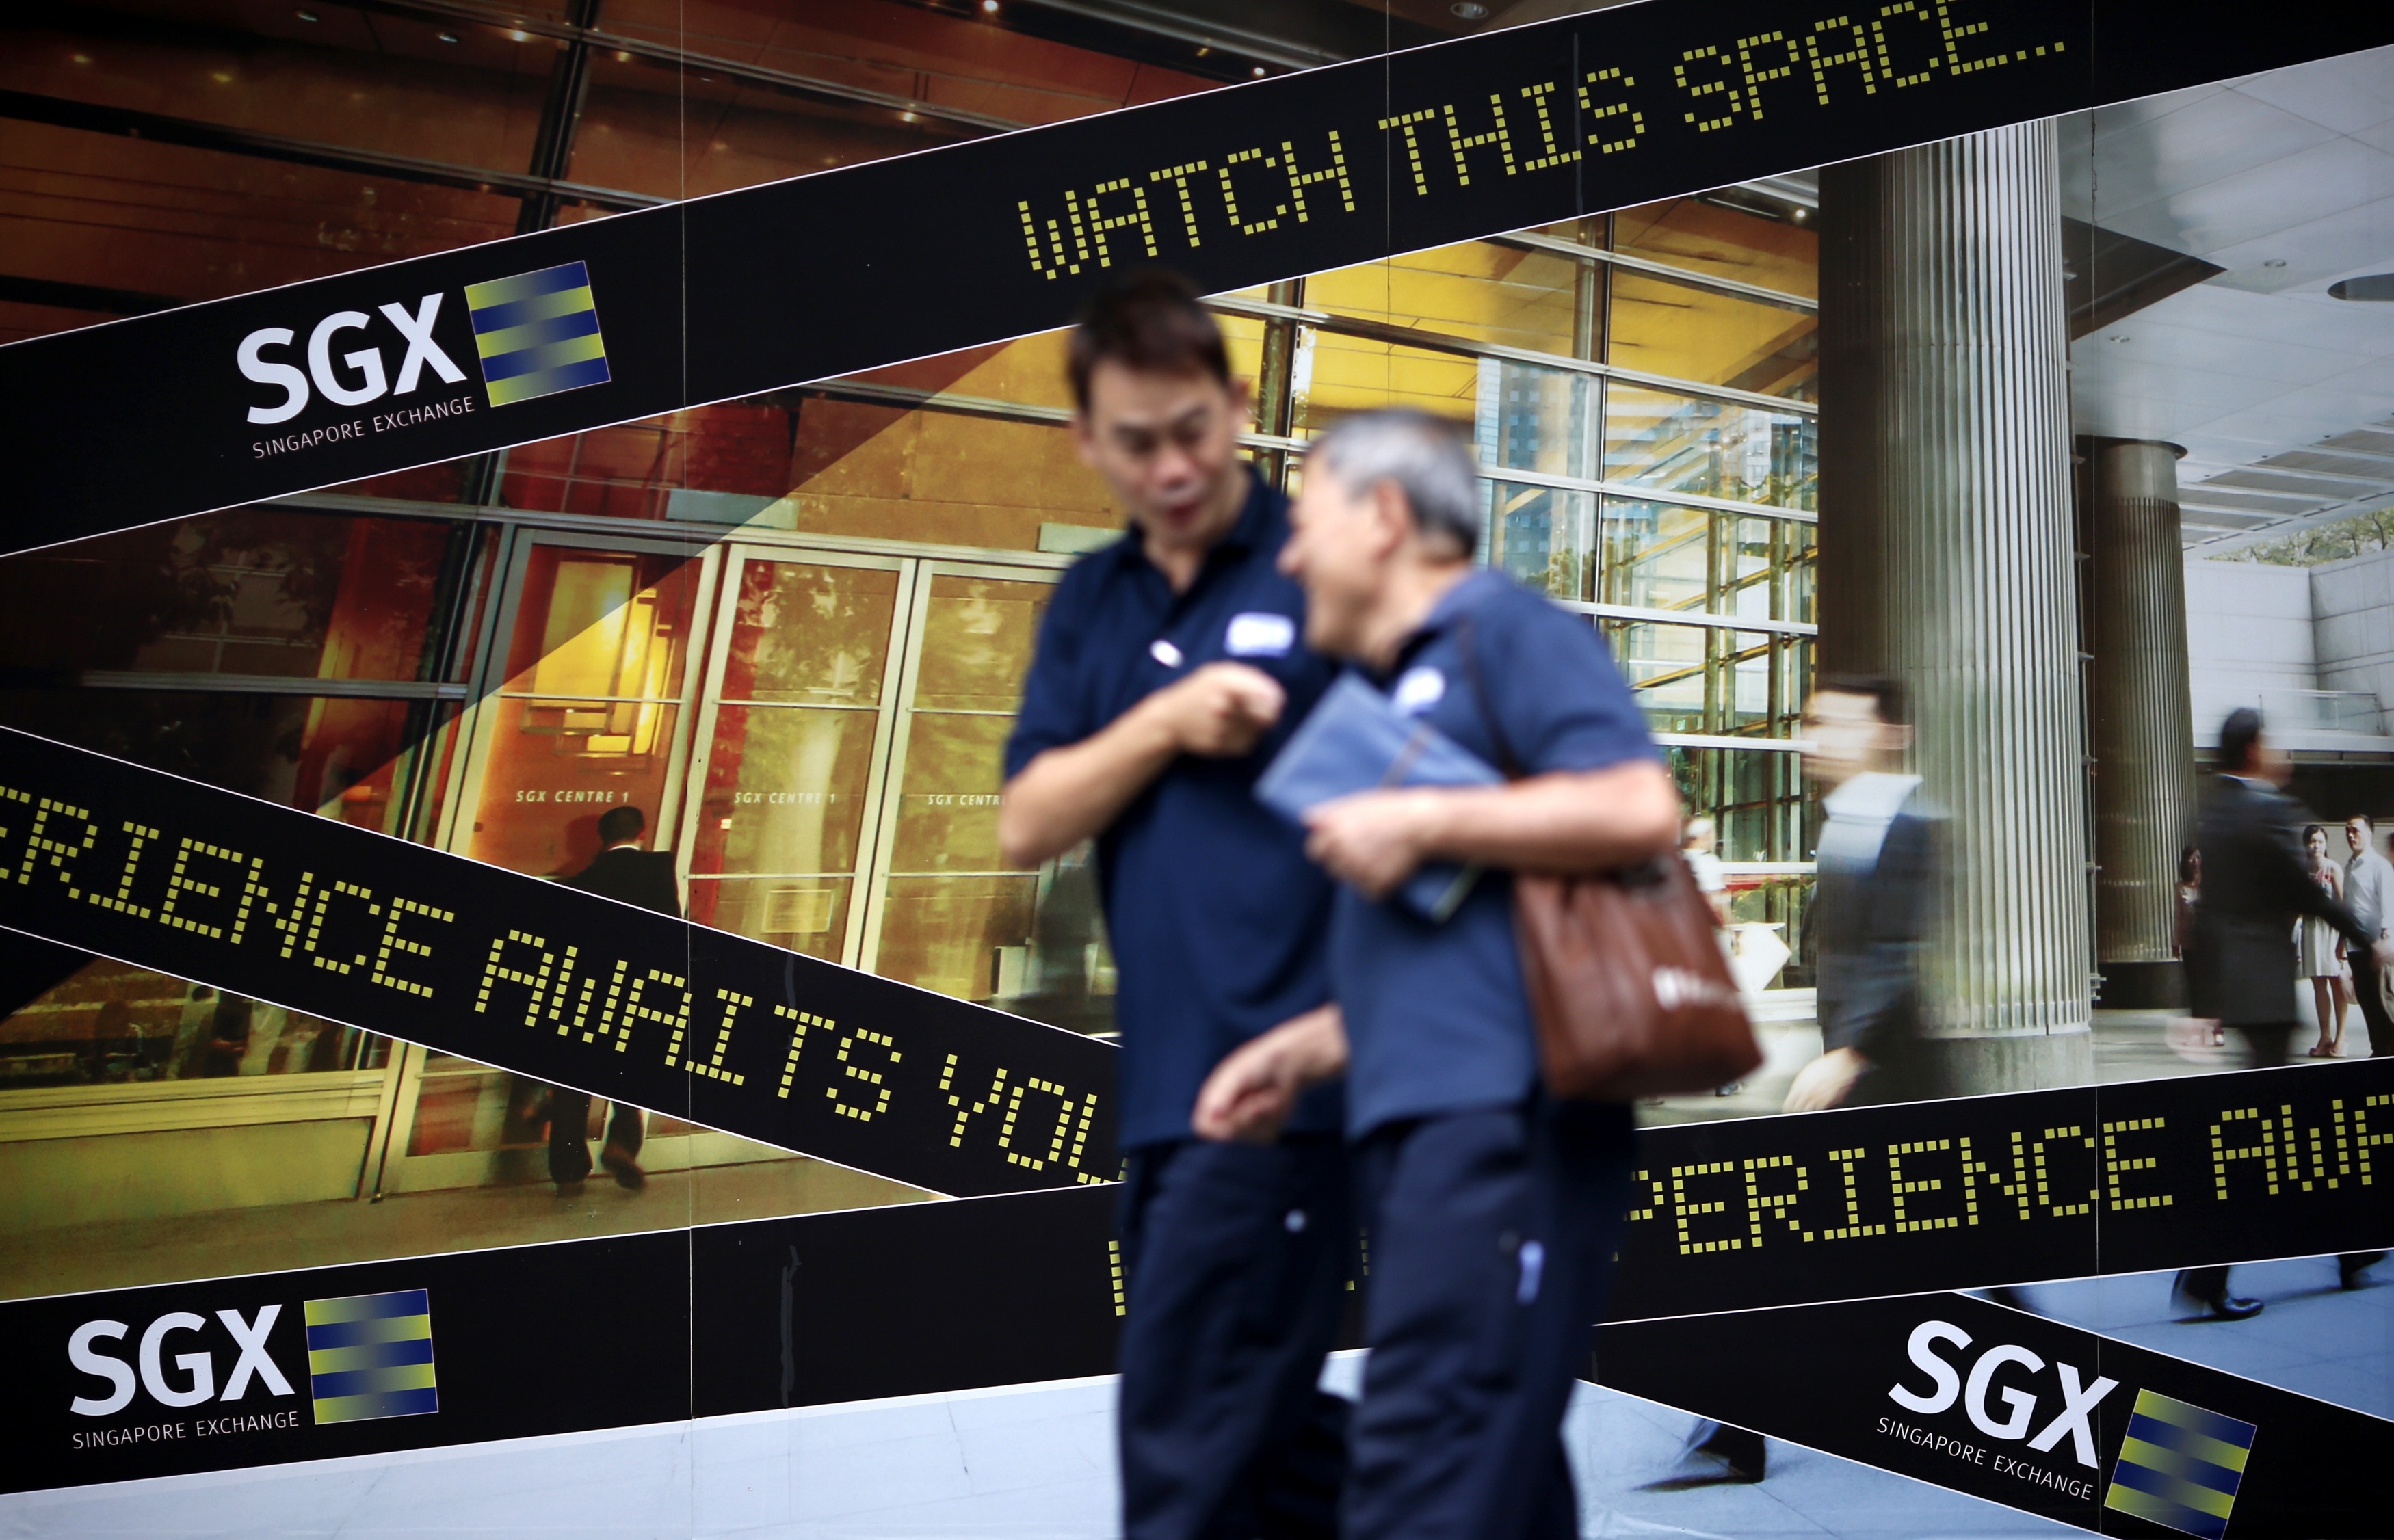 People walk past a logo of the Singapore Stock Exchange (SGX) outside its premises in the financial district of Singapore in this April 23, 2014 file photo. To match SGX-OUTLOOK/ Picture taken April 23, 2014. REUTERS/Edgar Su/Files (SINGAPORE - Tags: BUSINESS LOGO)